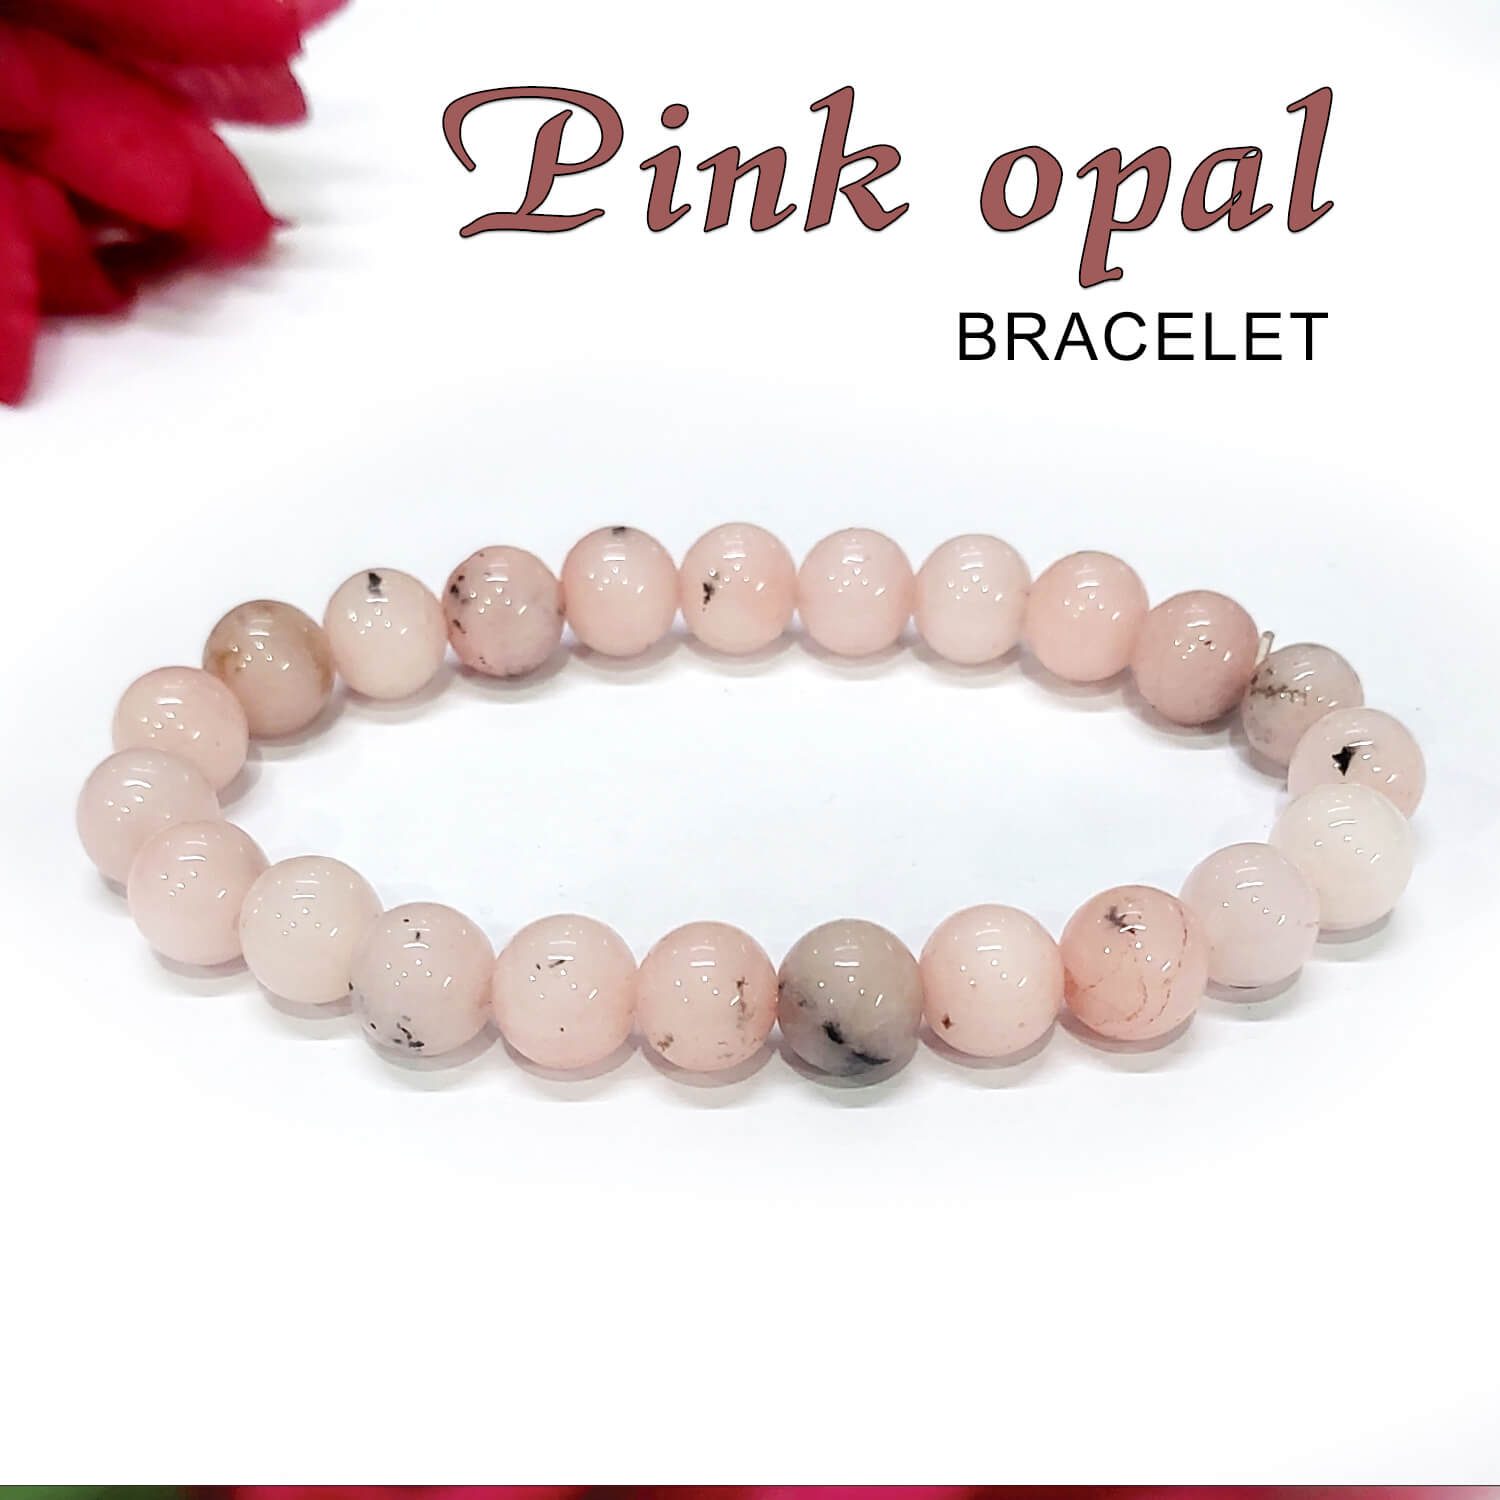 Pink Opal Bracelet for Love and Passion 8 mm Beads Bracelet Round Shap